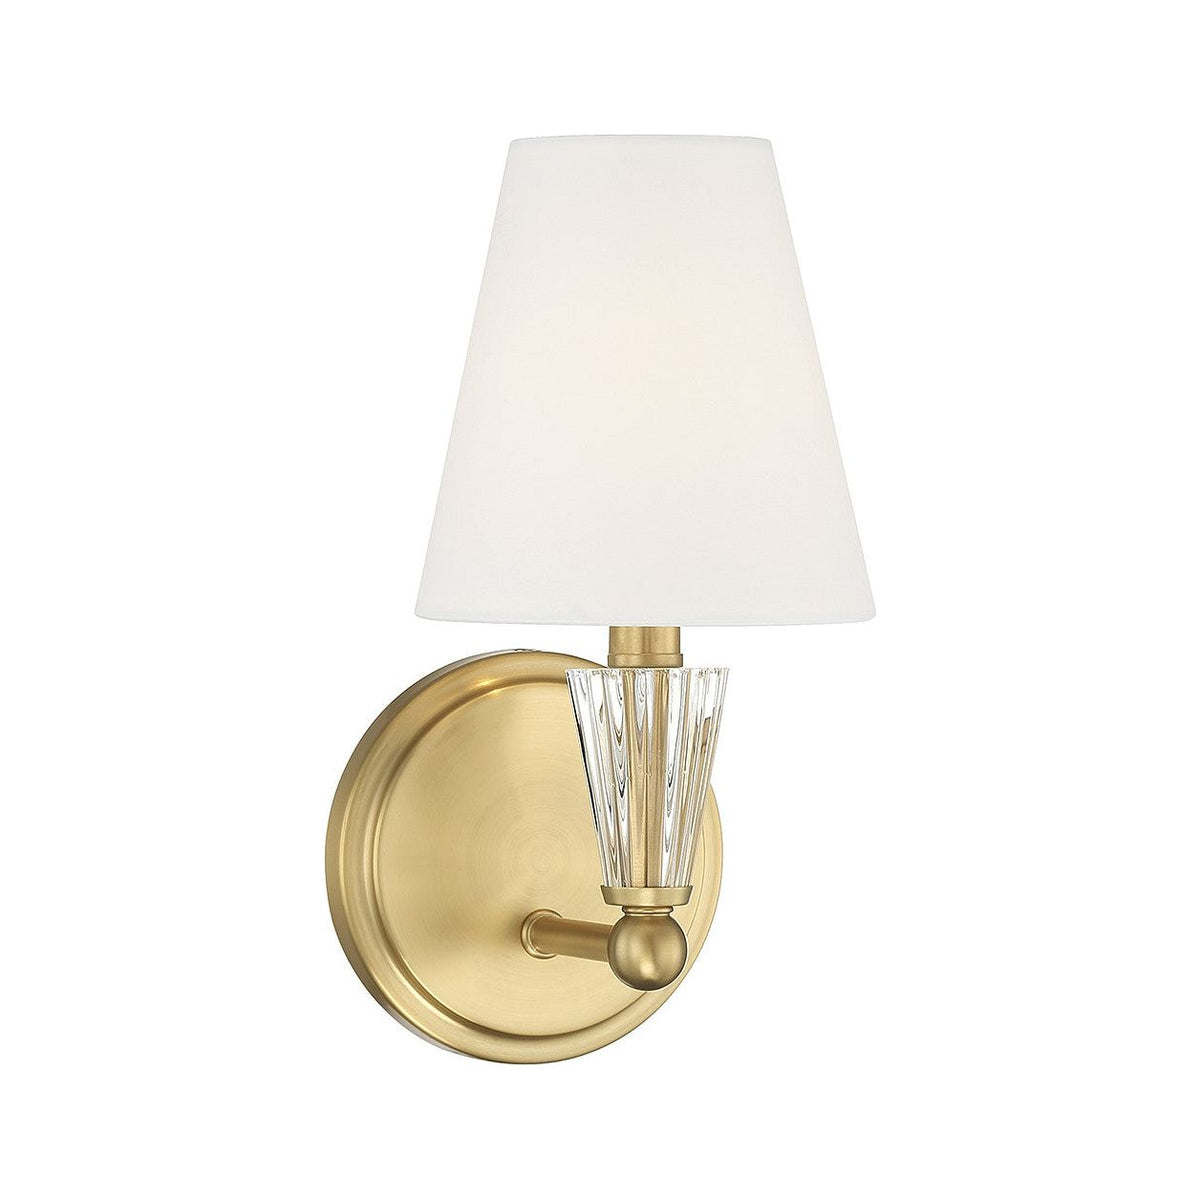 Meridian - M90102NB - One Light Wall Sconce - Natural Brass